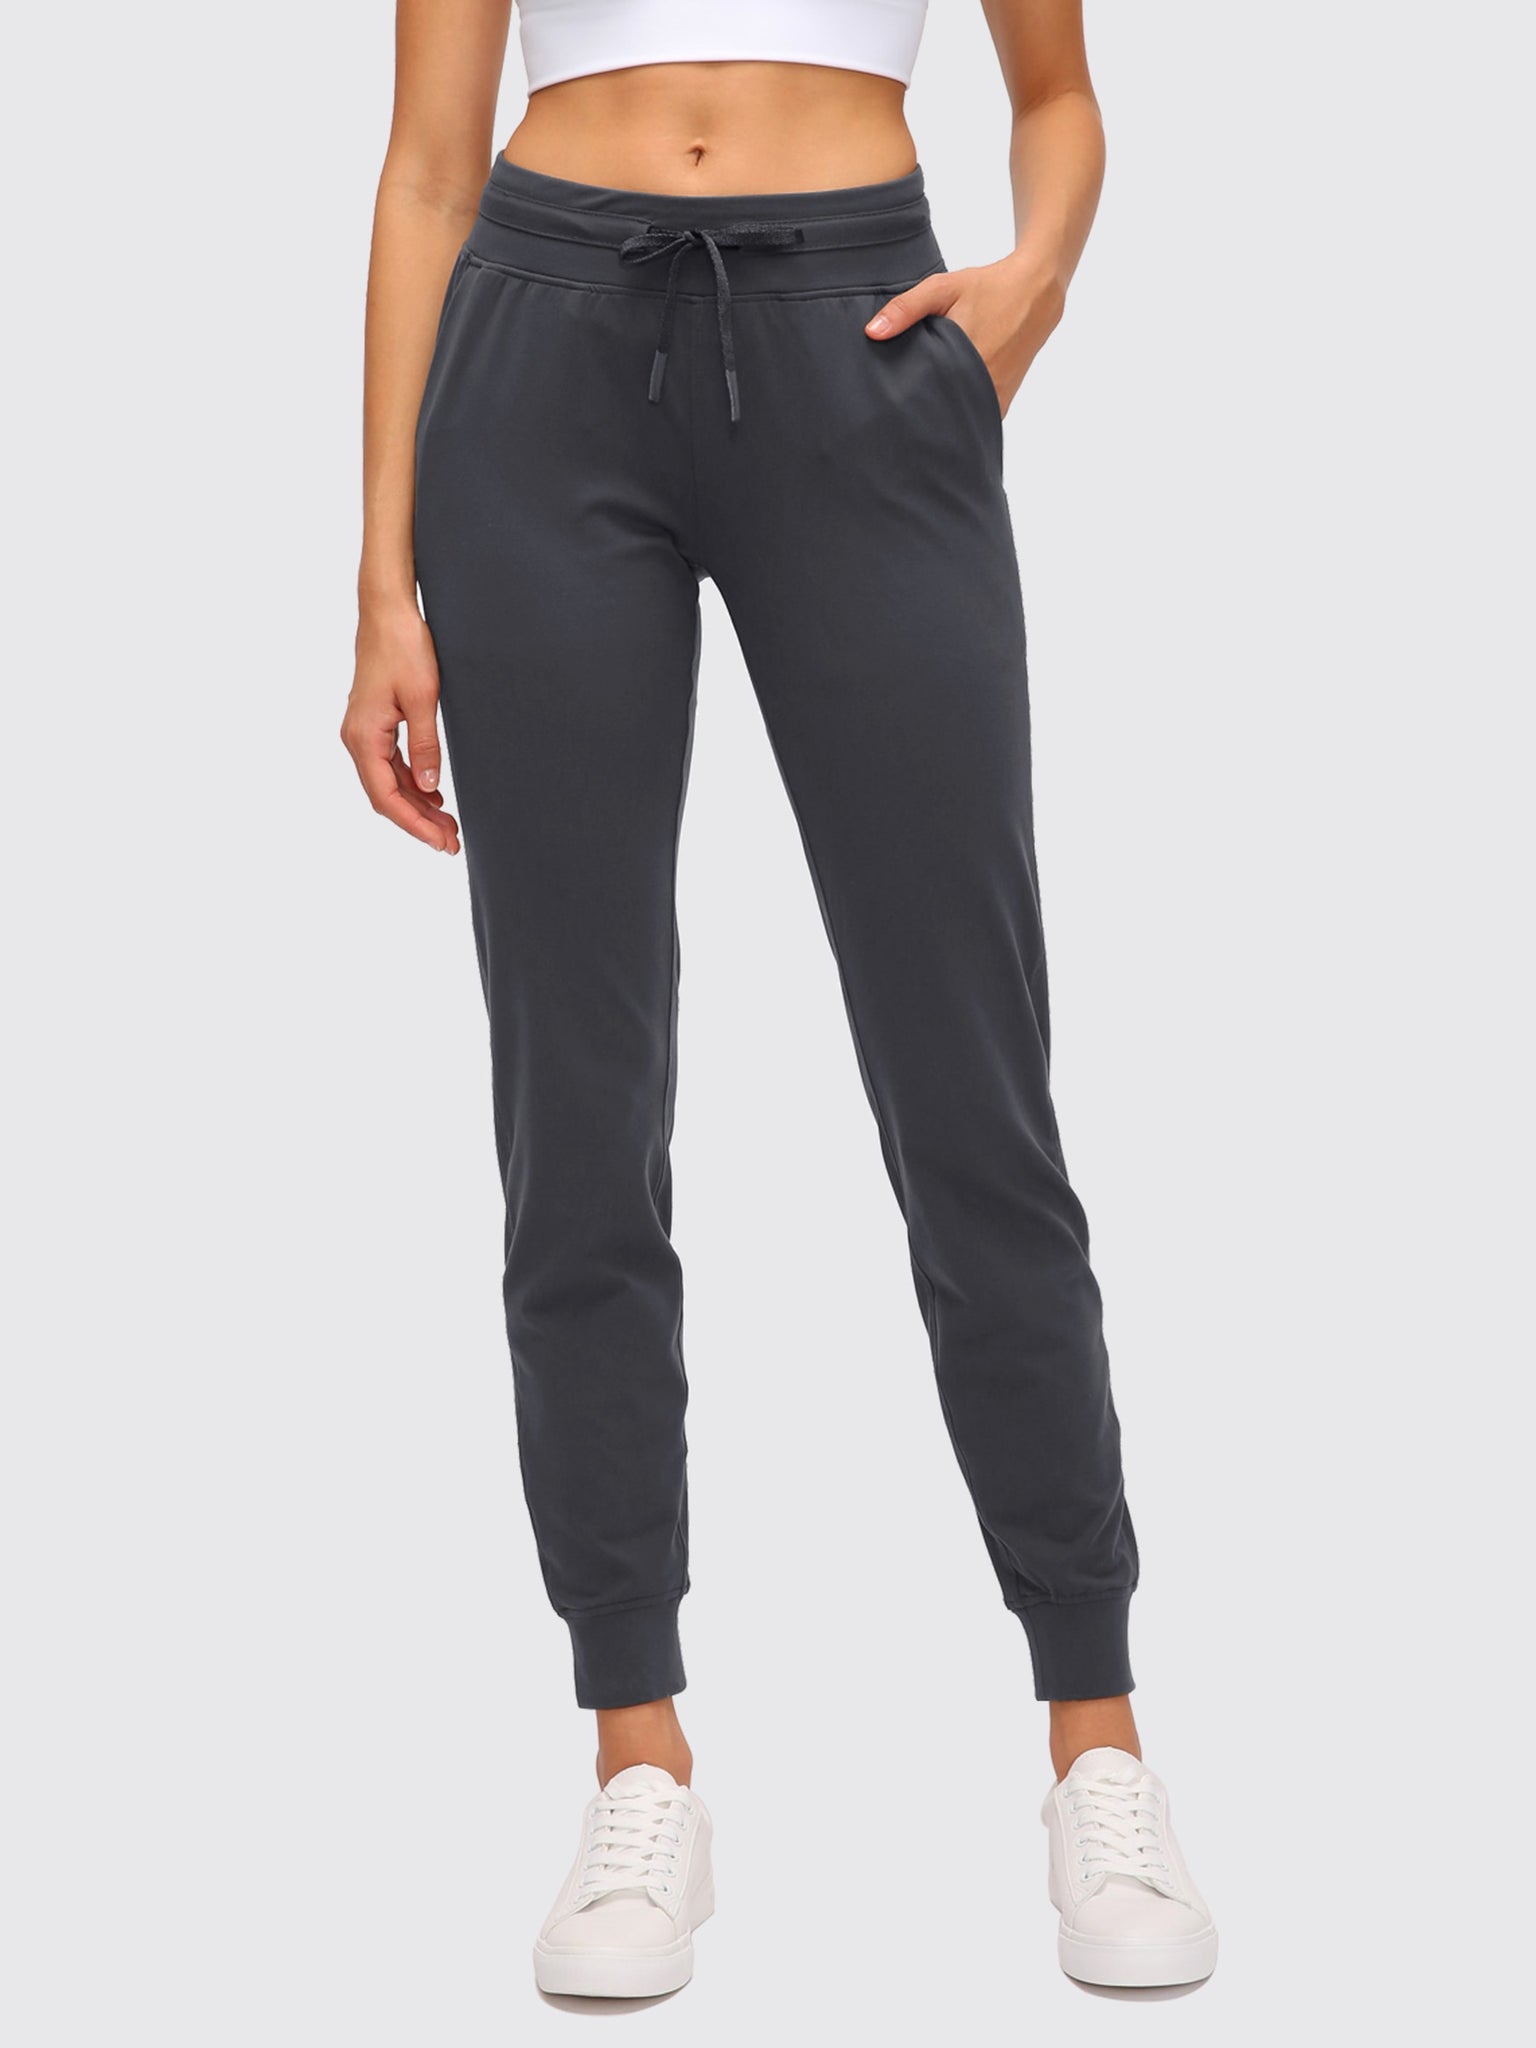 Women's Stretch High-Rise Joggers